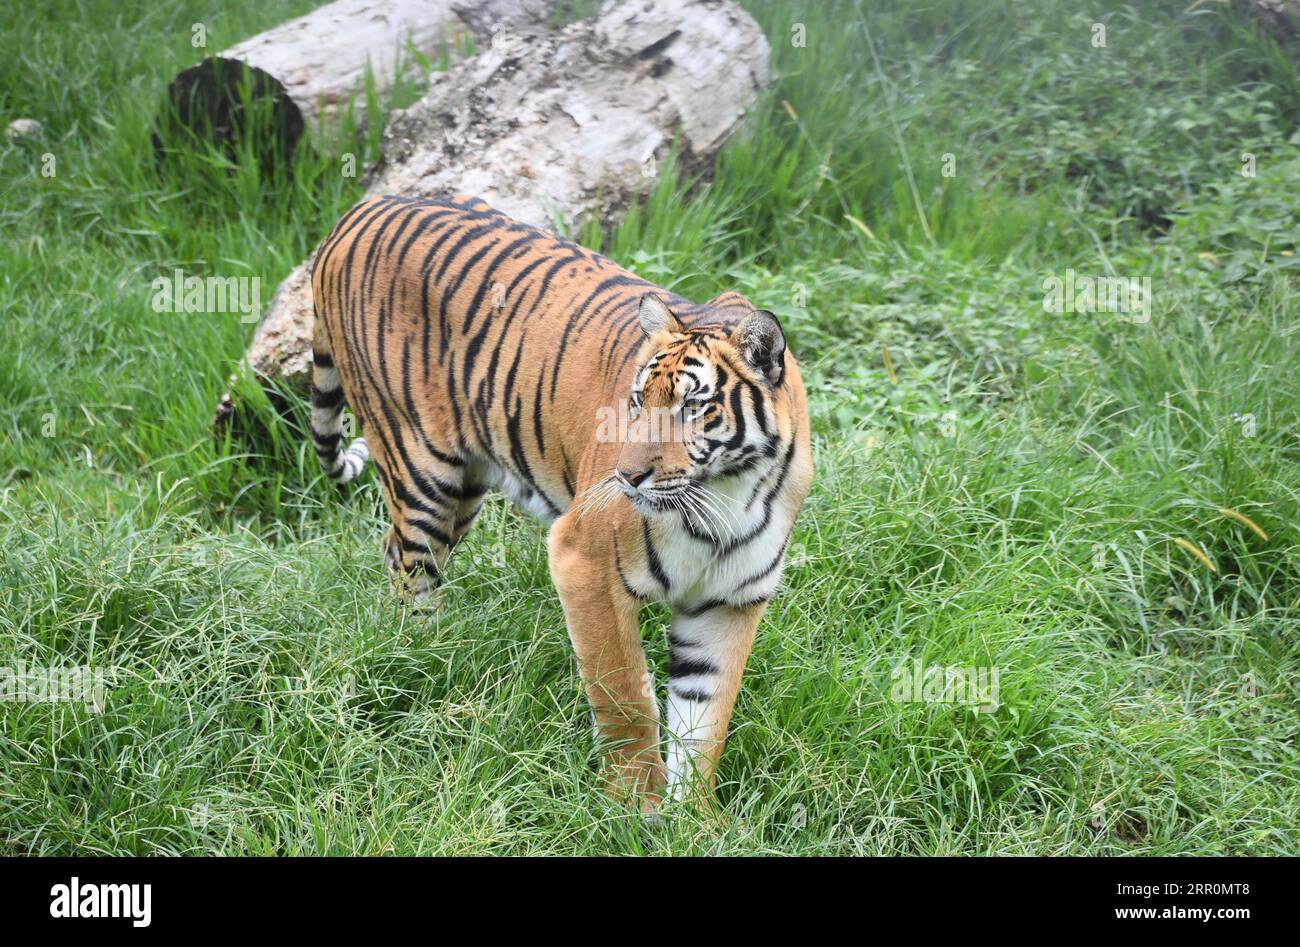 200820 -- LONGYAN, Aug. 20, 2020 -- A South China Tiger is seen in the Meihua Mountains Nature Reserve in Longyan, southeast China s Fujian Province, Aug. 19, 2020. Meihua Mountains is known as the home of the South China Tiger, one of the world s most endangered animals.  CHINA-FUJIAN-SOUTH CHINA TIGERS-NATURE RESERVE CN LinxShanchuan PUBLICATIONxNOTxINxCHN Stock Photo